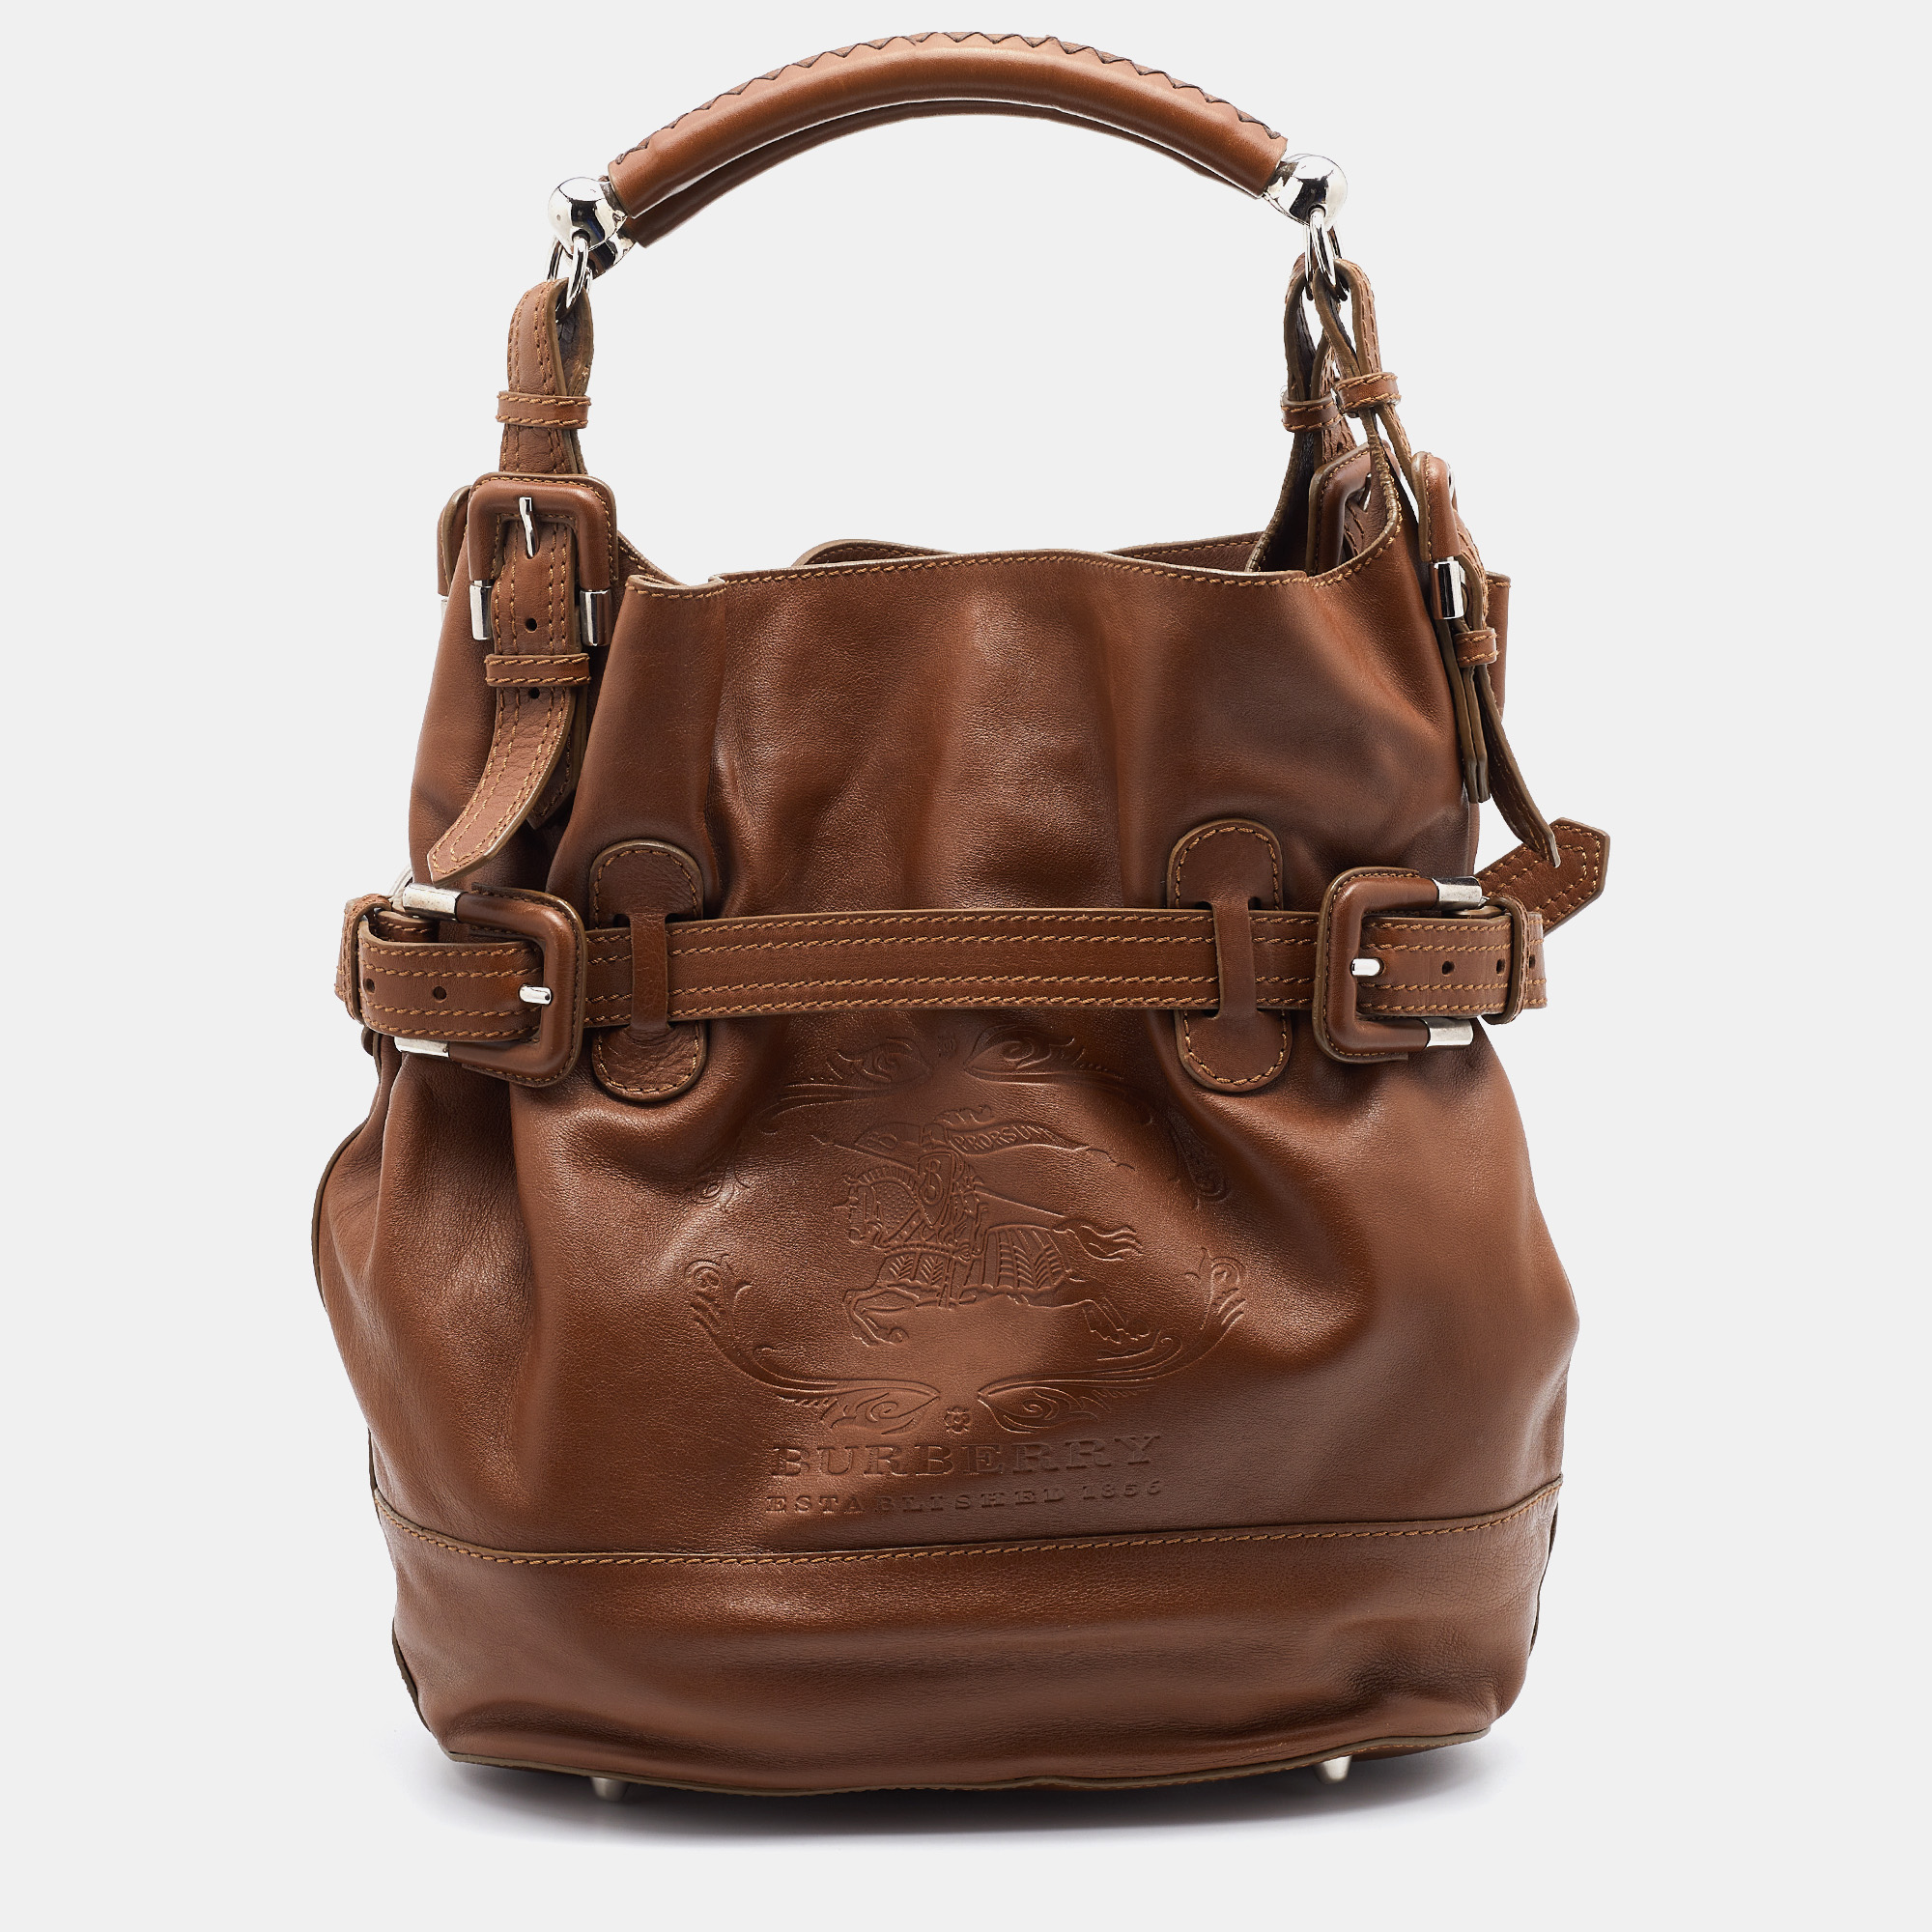 Pre-owned Burberry Brown Leather Hobo